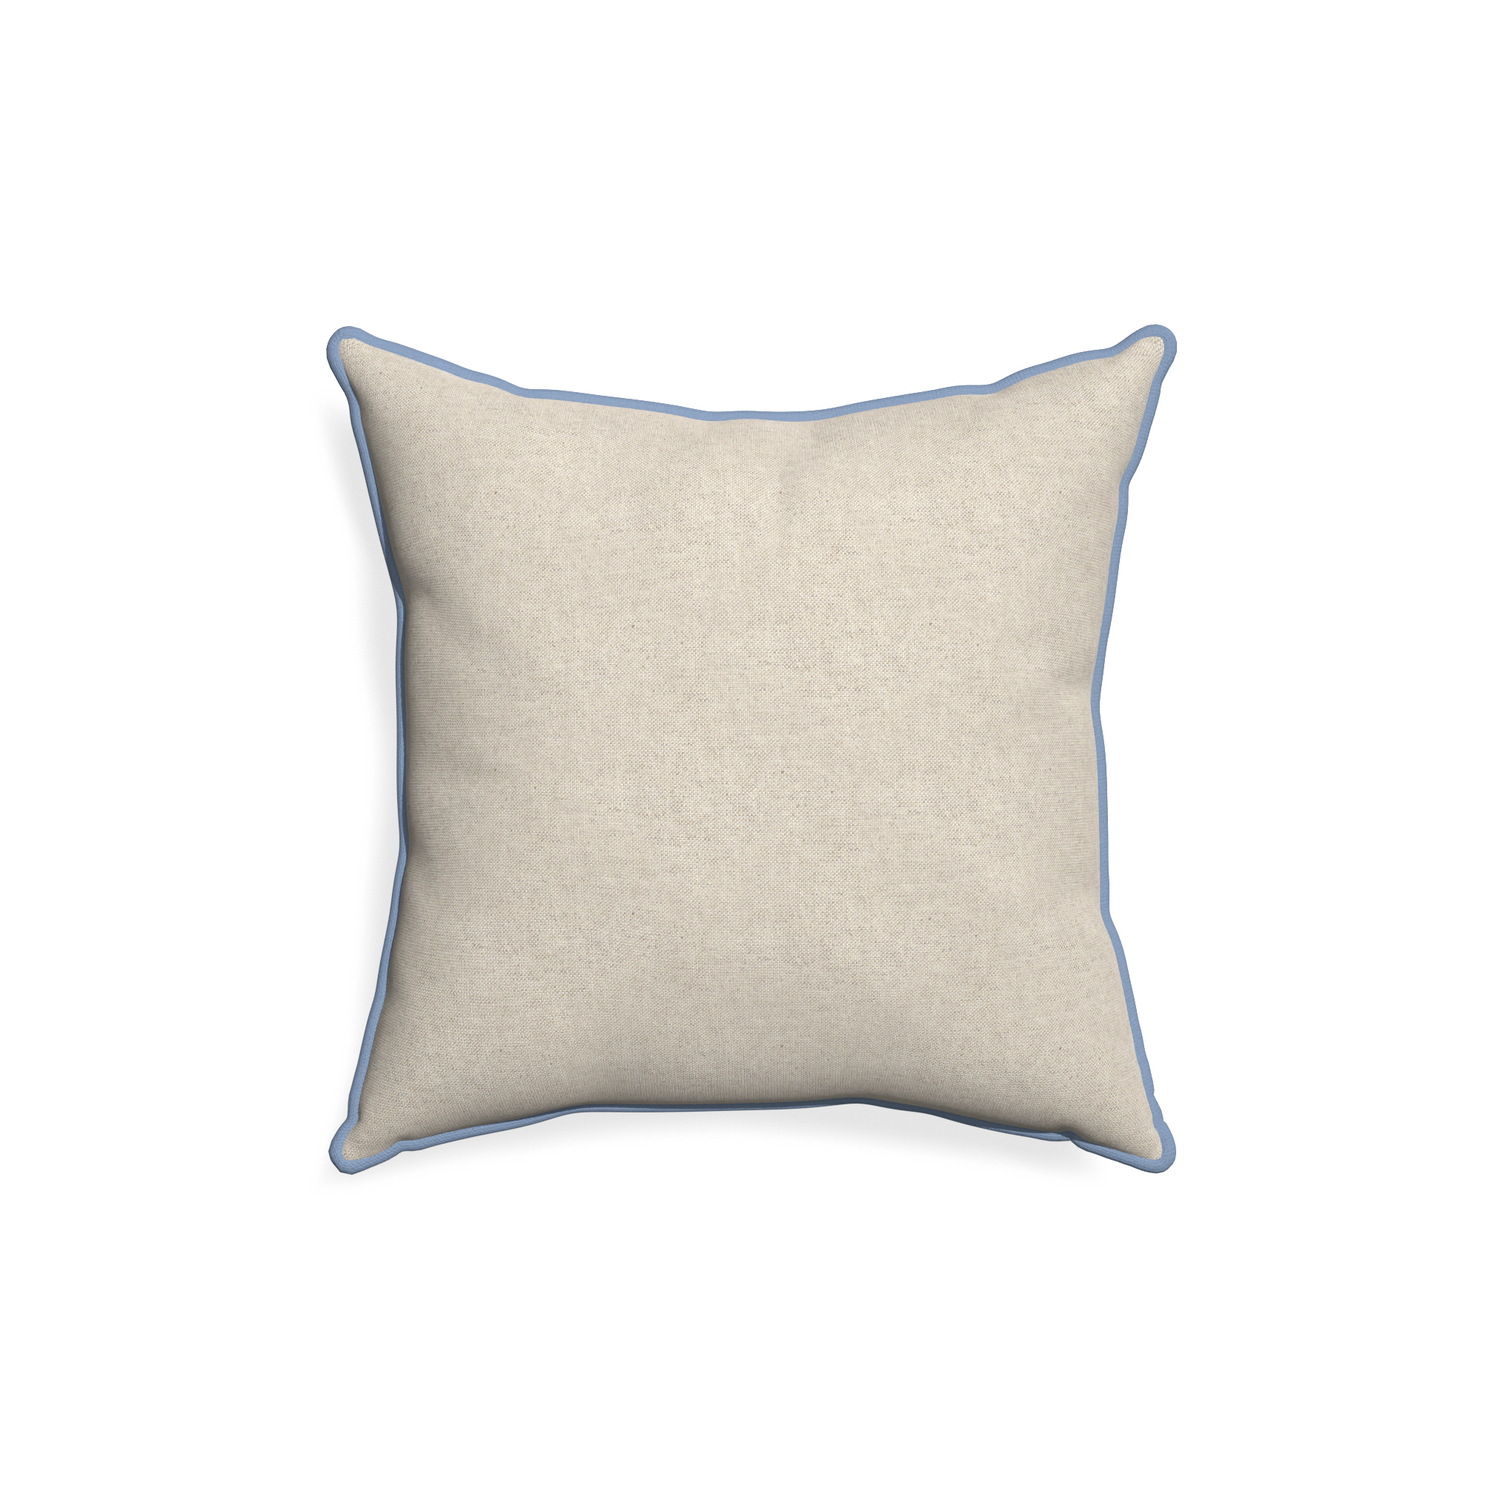 18-square oat custom light brownpillow with sky piping on white background